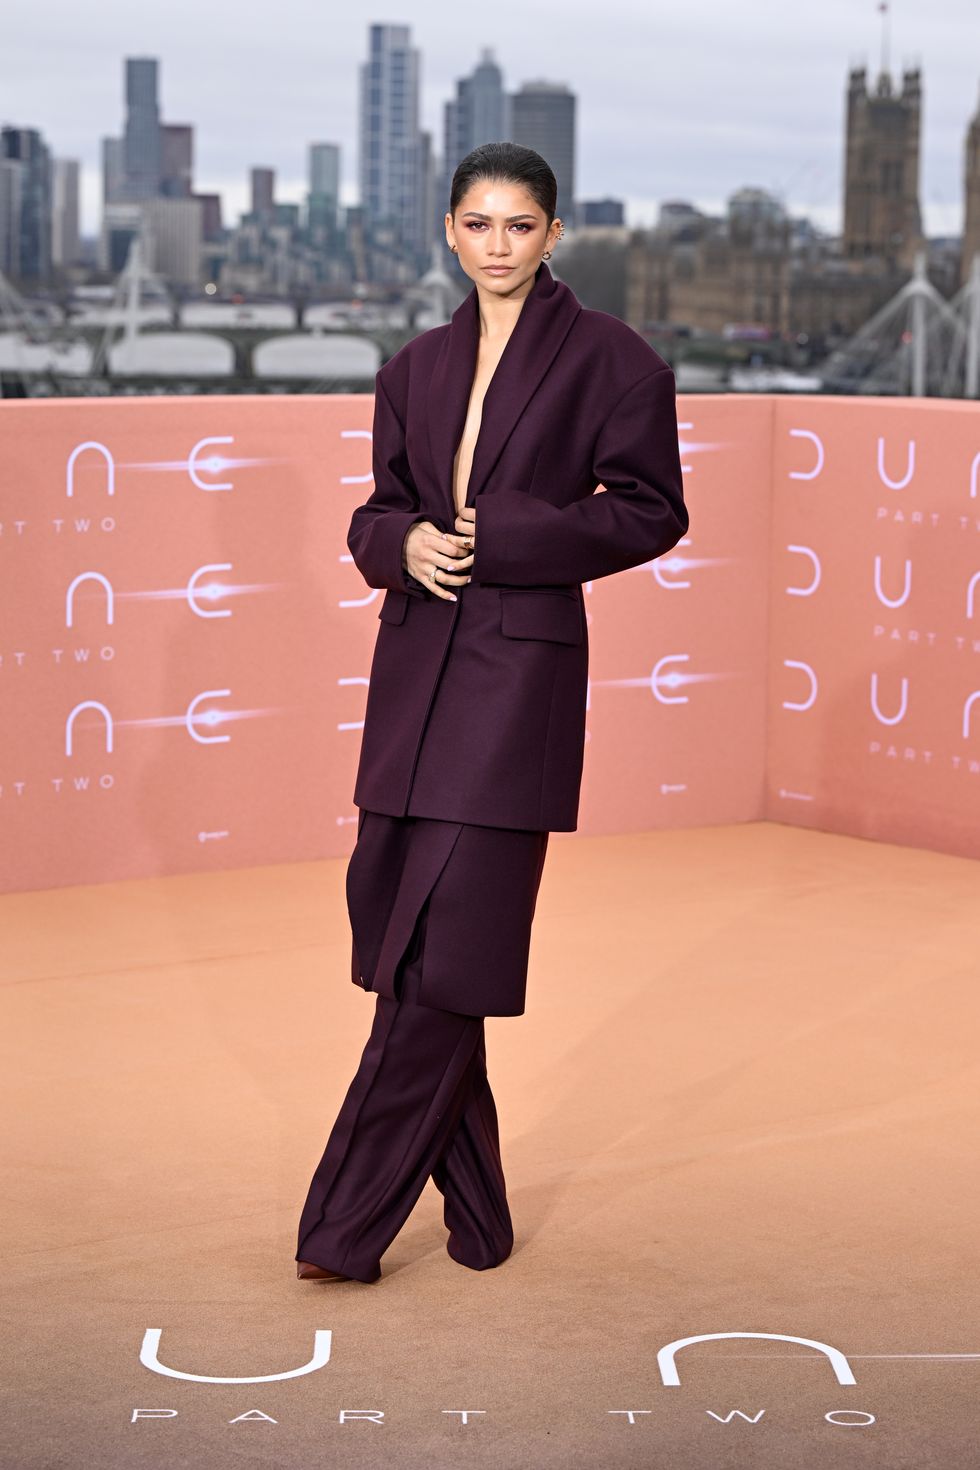 Zendaya is all about a perfect suit